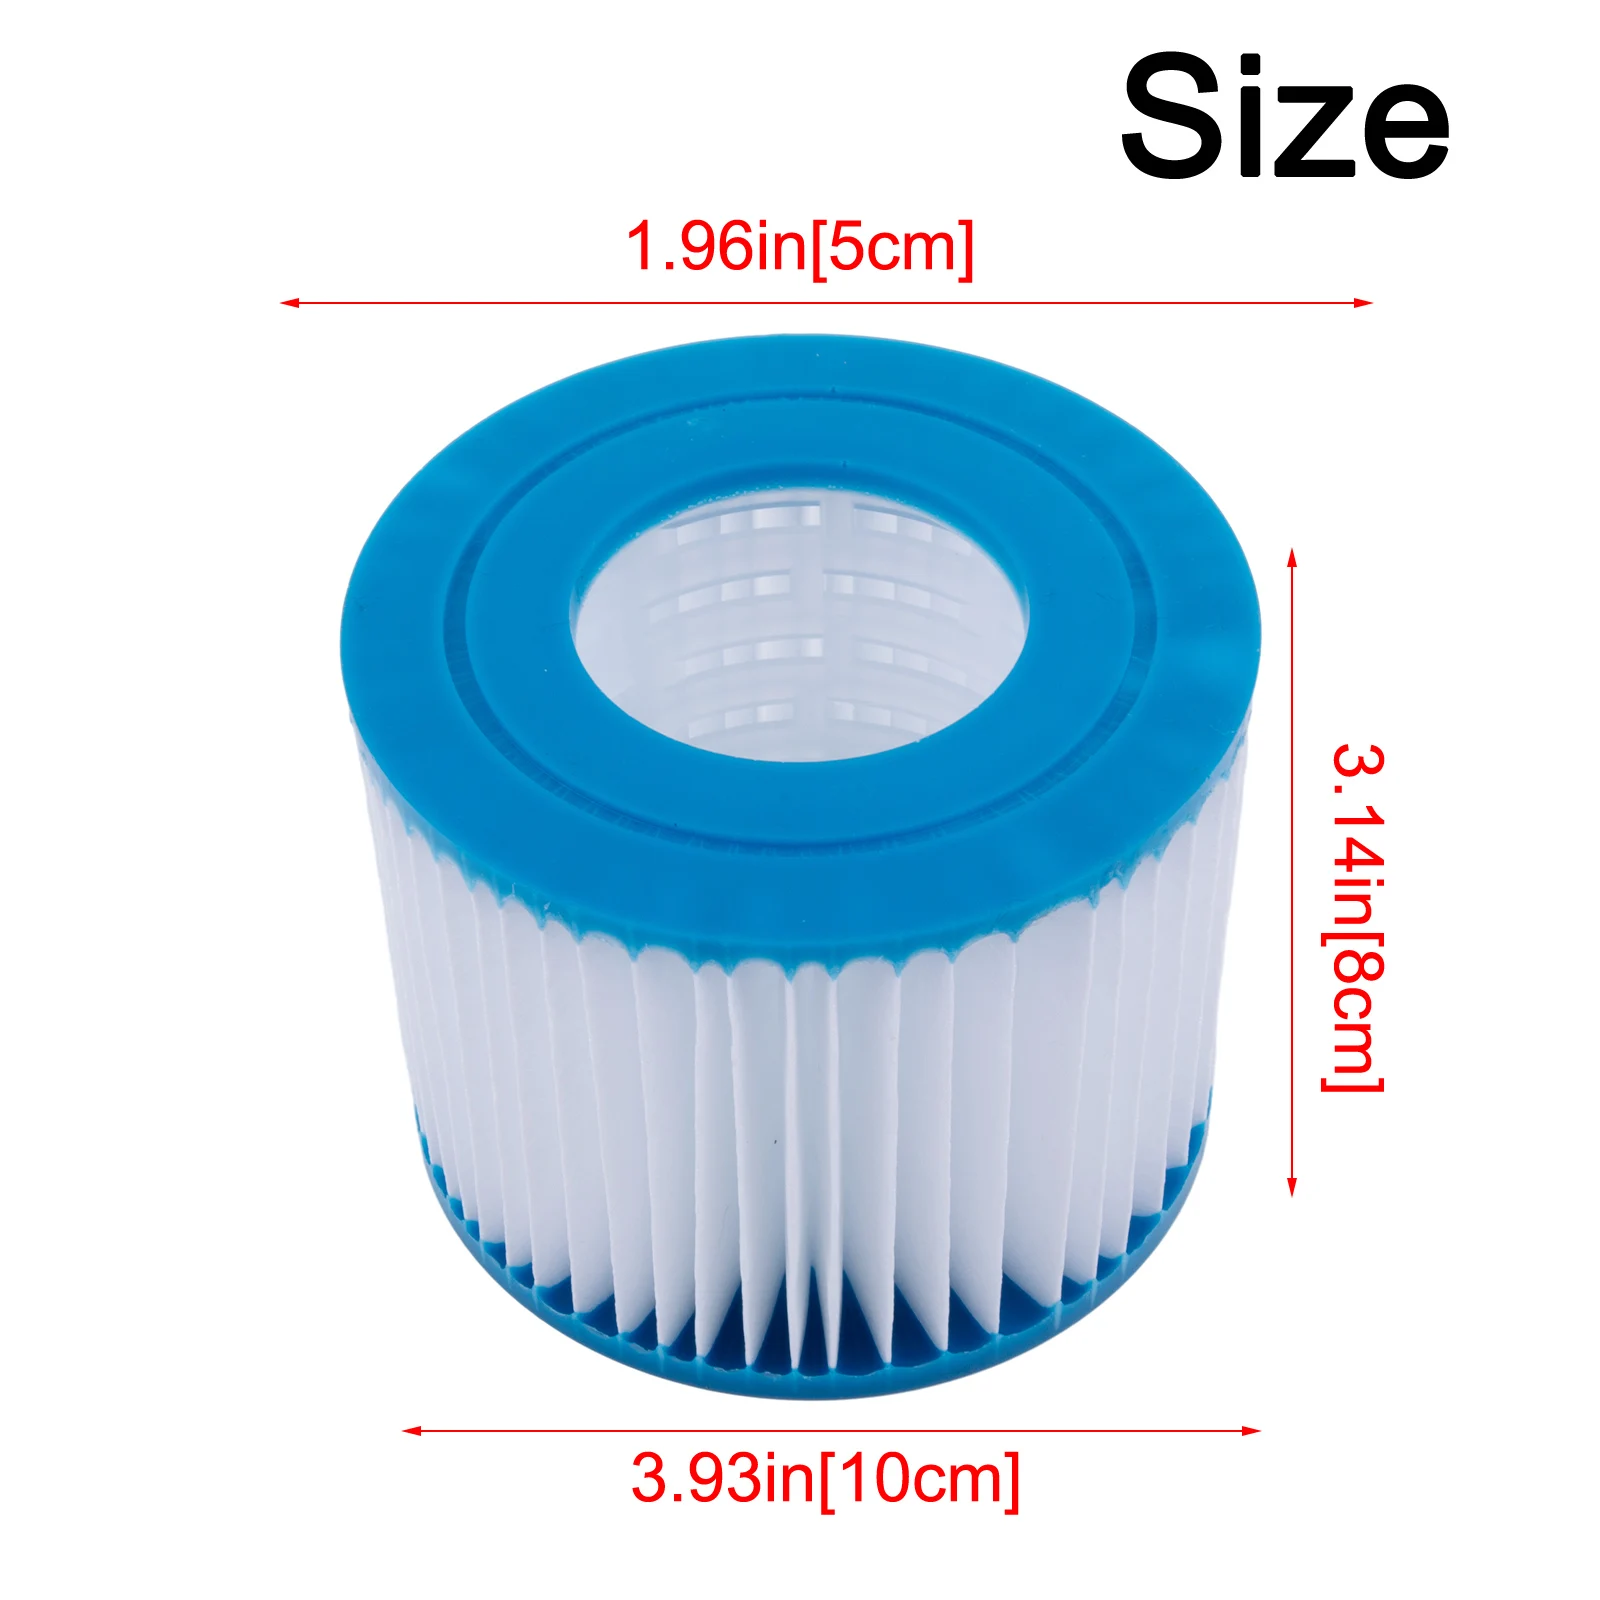 

Brand New Pool Filter Cartridge Filters 10*8*5cm 6Pcs Accessories Durable For Spas Swimming Pool Portable